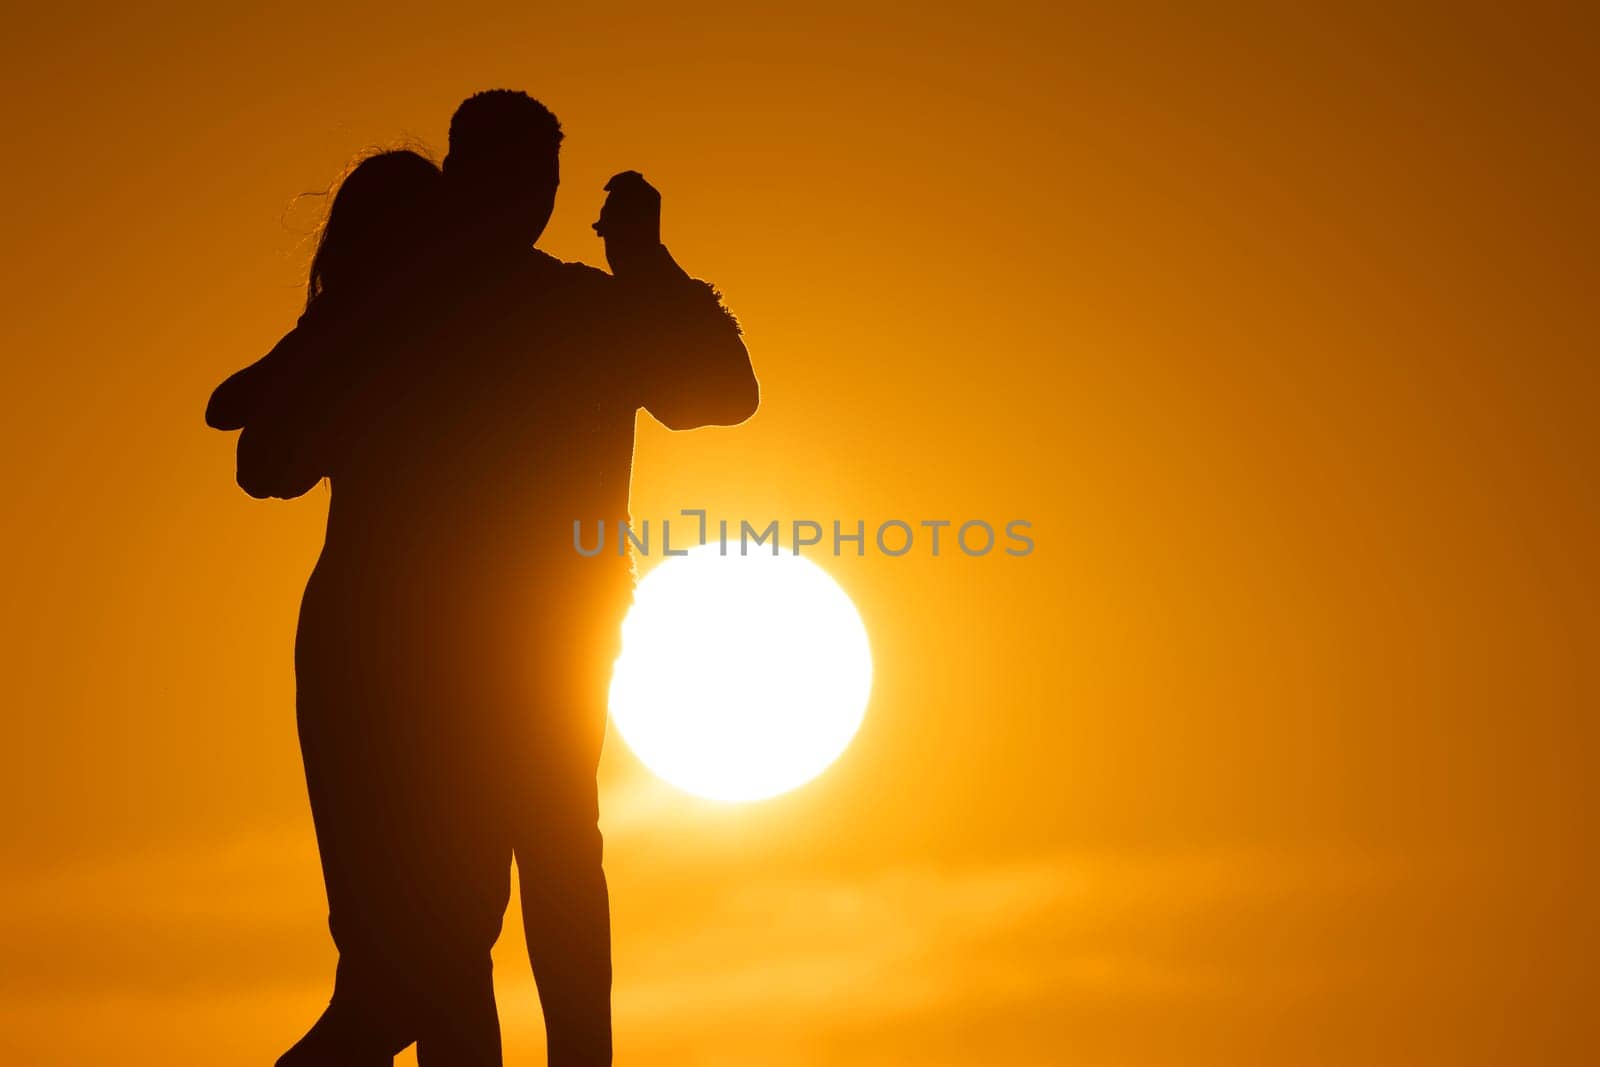 A couple is dancing in the sun, with the sun in the background. Scene is romantic and joyful